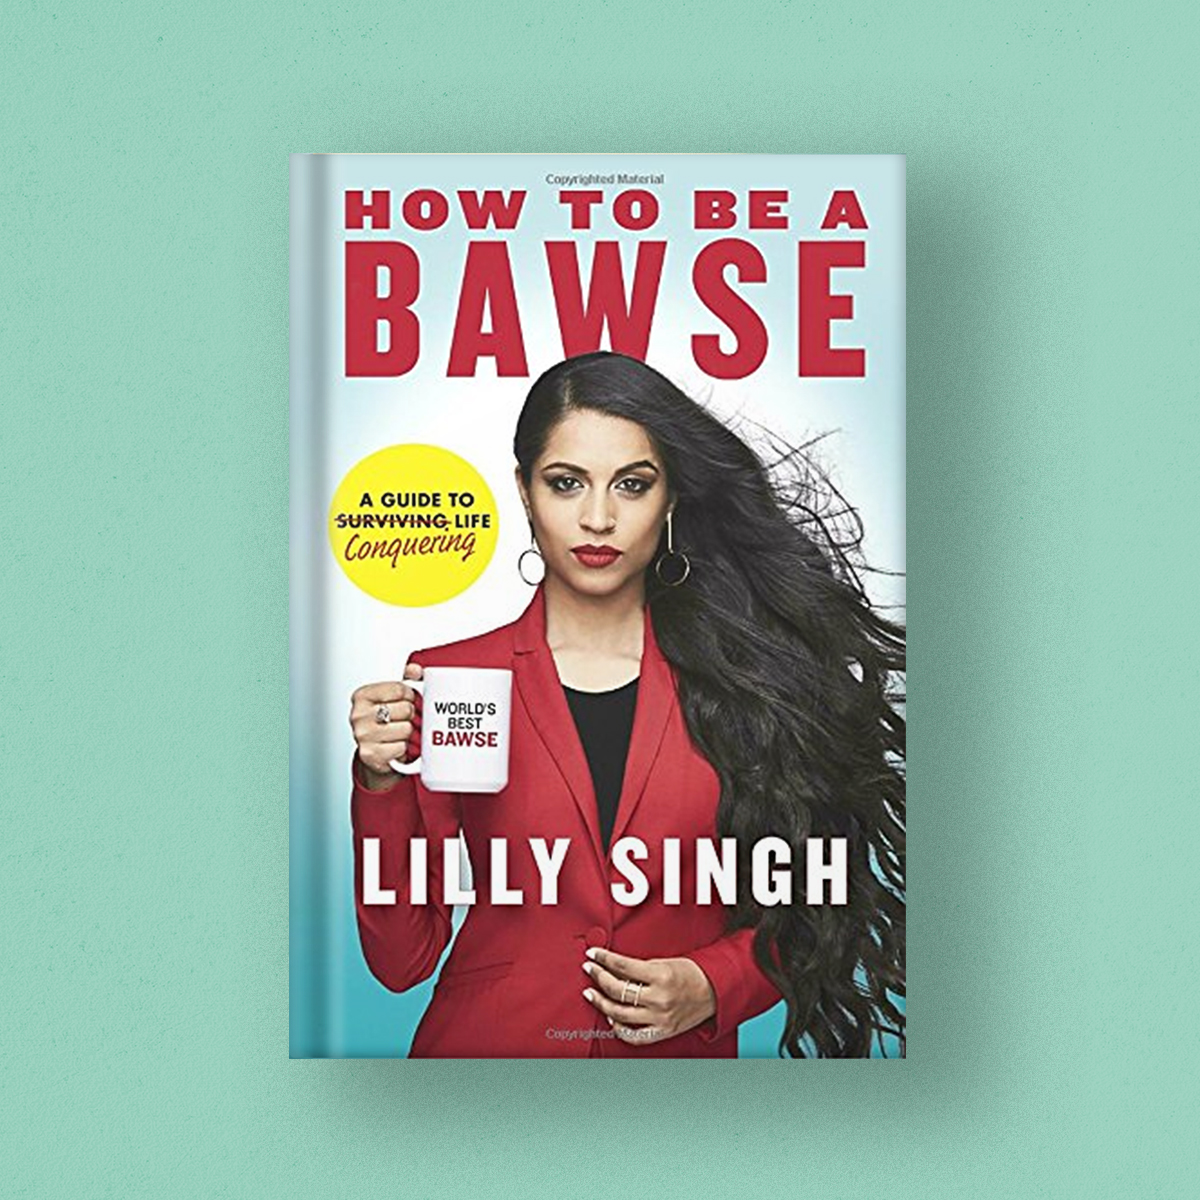 How To Be A Bawse